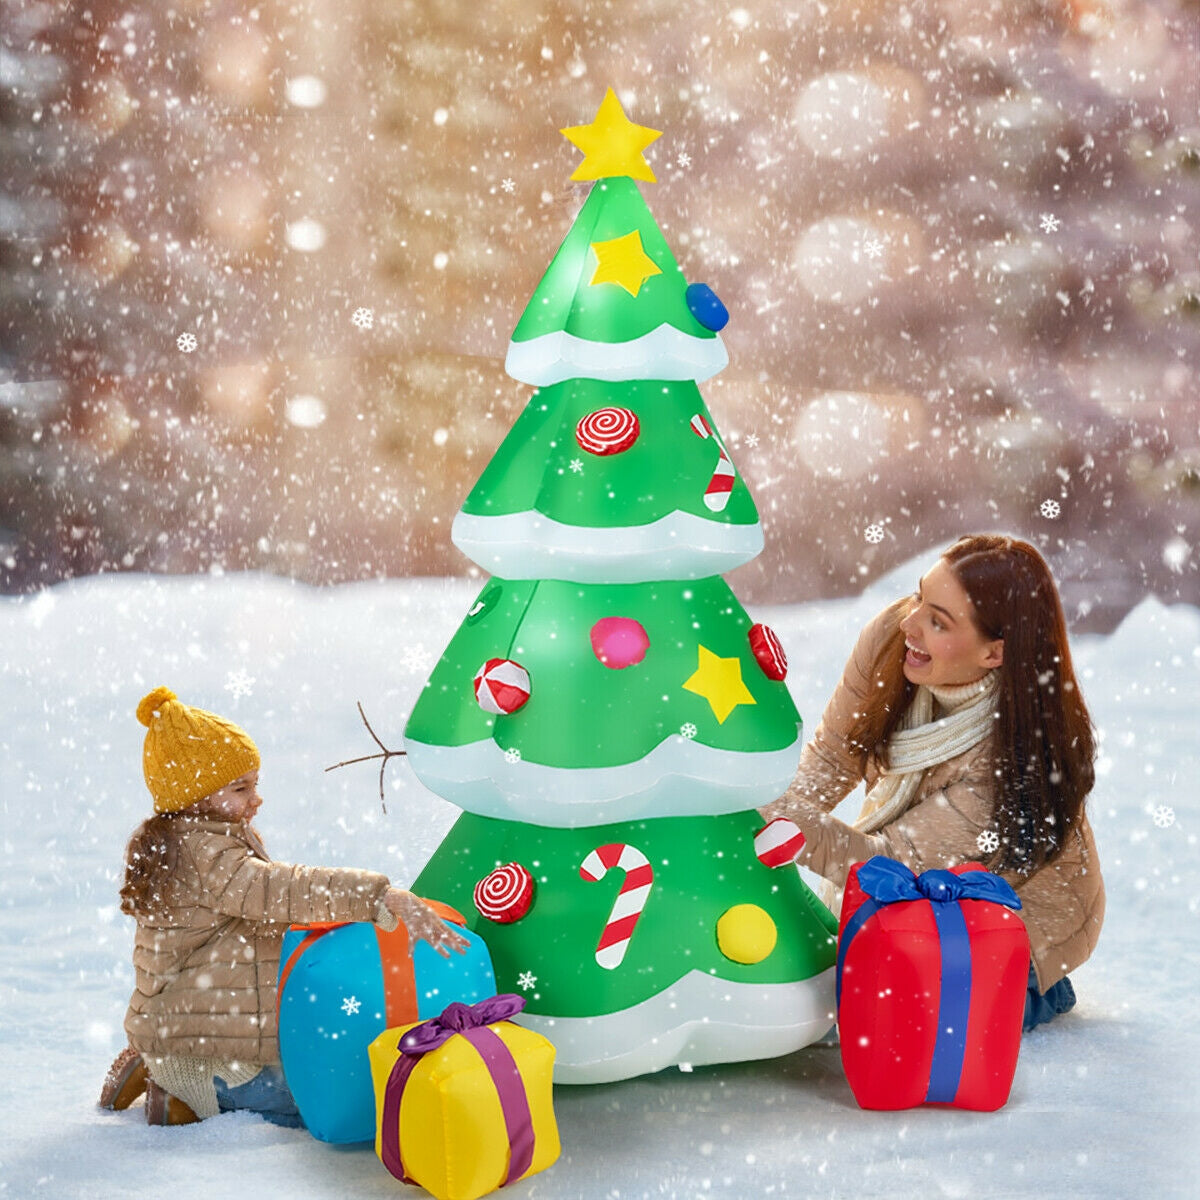 Giant Inflatable Christmas Tree with 3 Gift Wrapped Boxes-Boyel Living